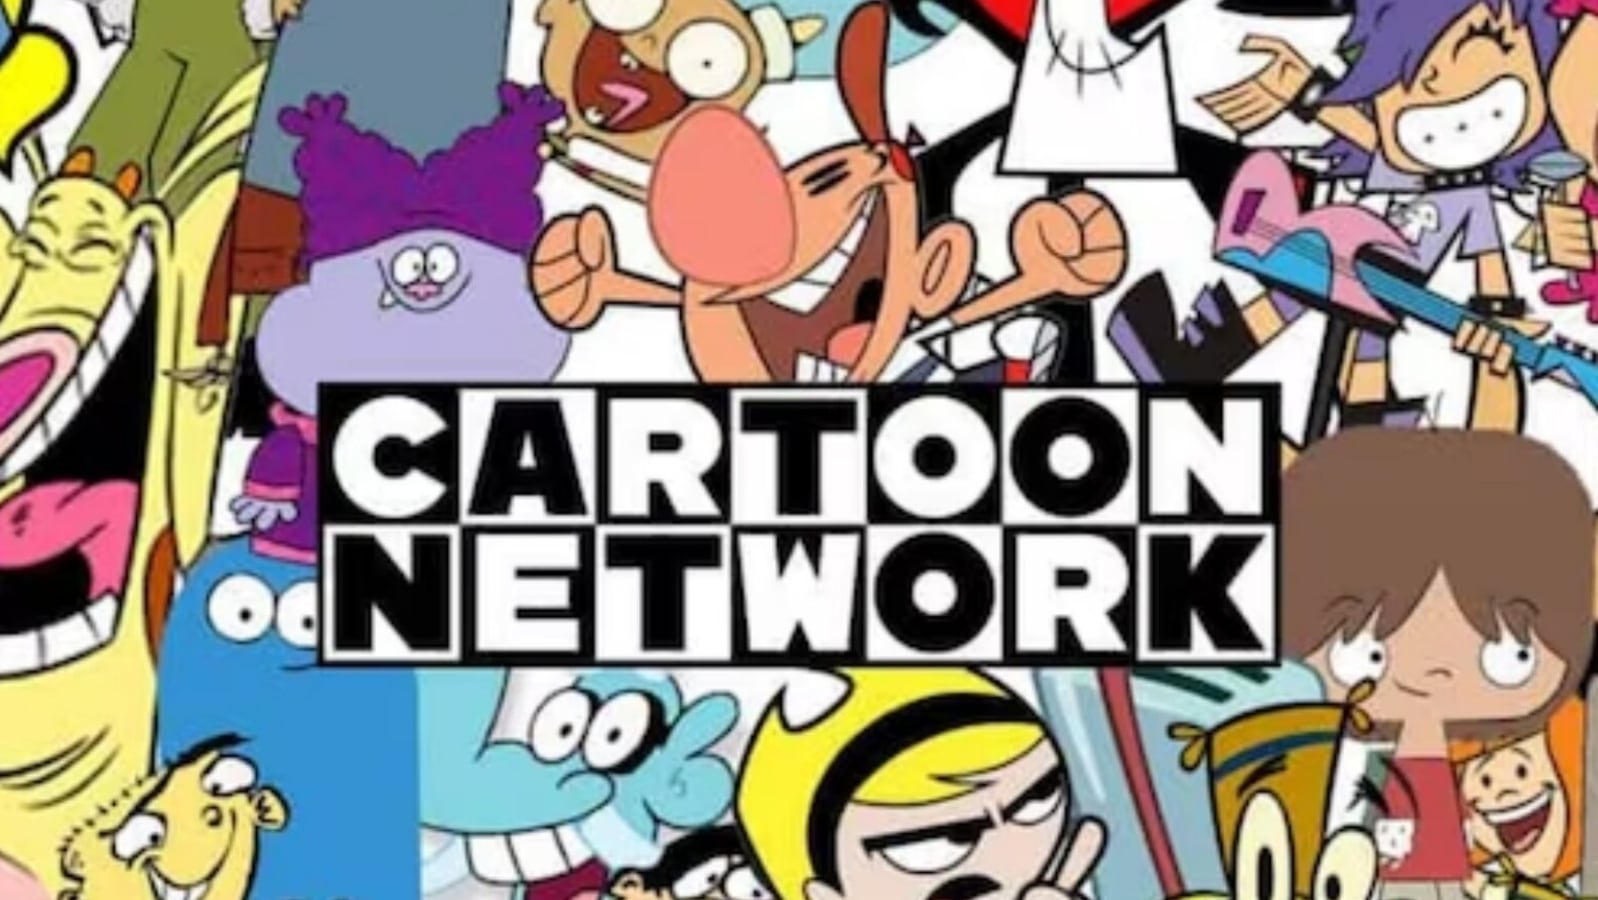 Cartoon Network isn't going away, channel to continue producing 'great  content,' rep says